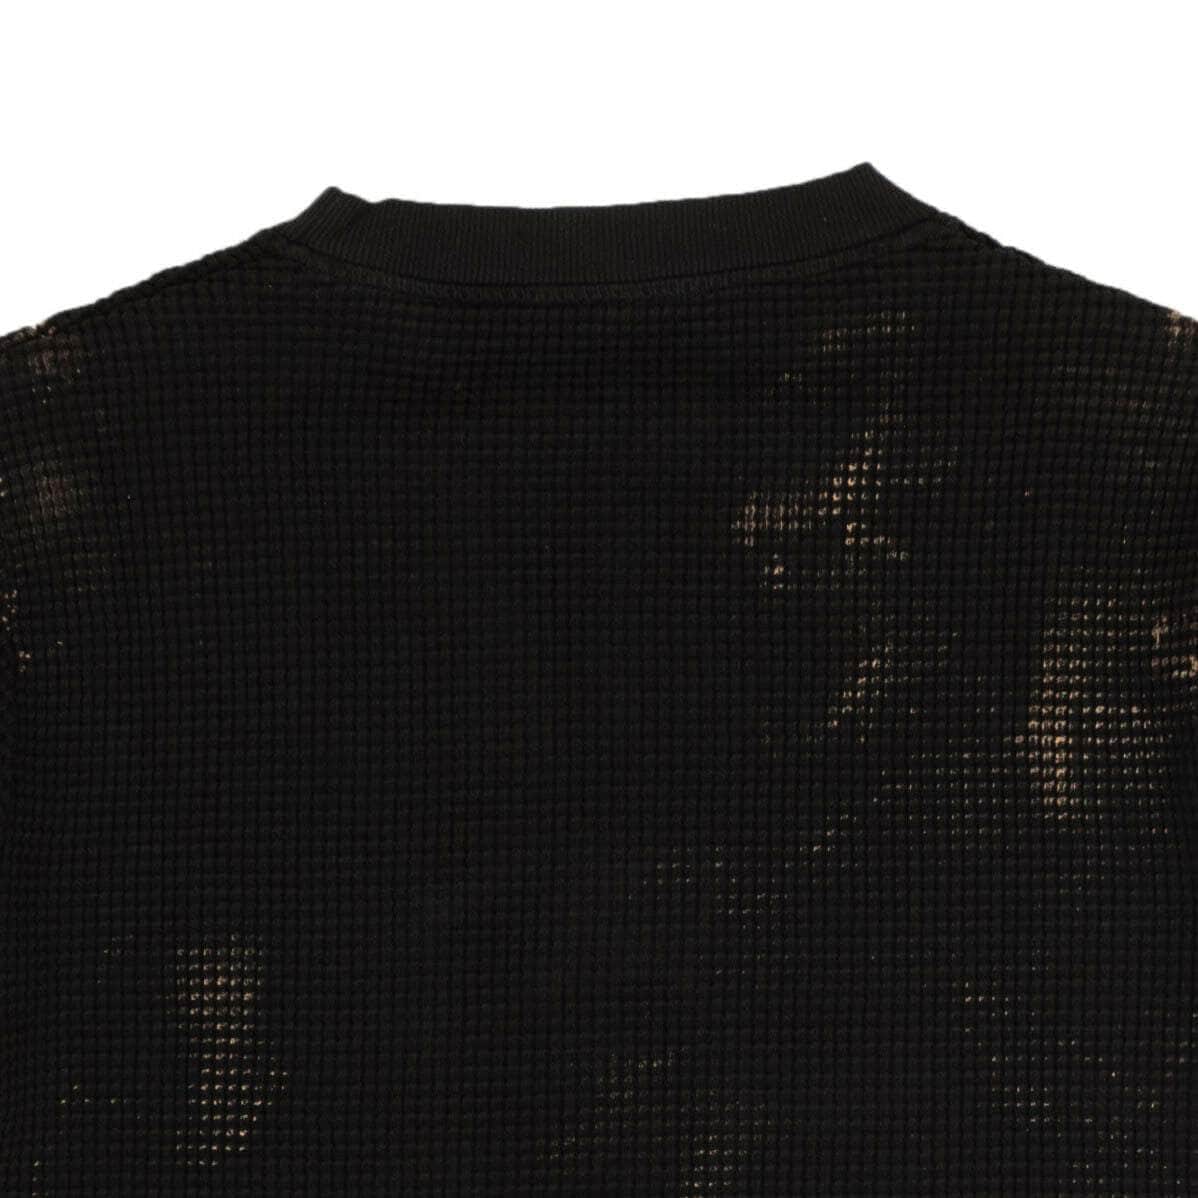 424 ON FAIRFAX 250-500, 424-on-fairfax, channelenable-all, chicmi, couponcollection, gender-mens, main-clothing, mens-crewnecks, mens-shoes, size-m, size-s, size-xs Black And Brown Waffle Crewneck Layered T-Shirt